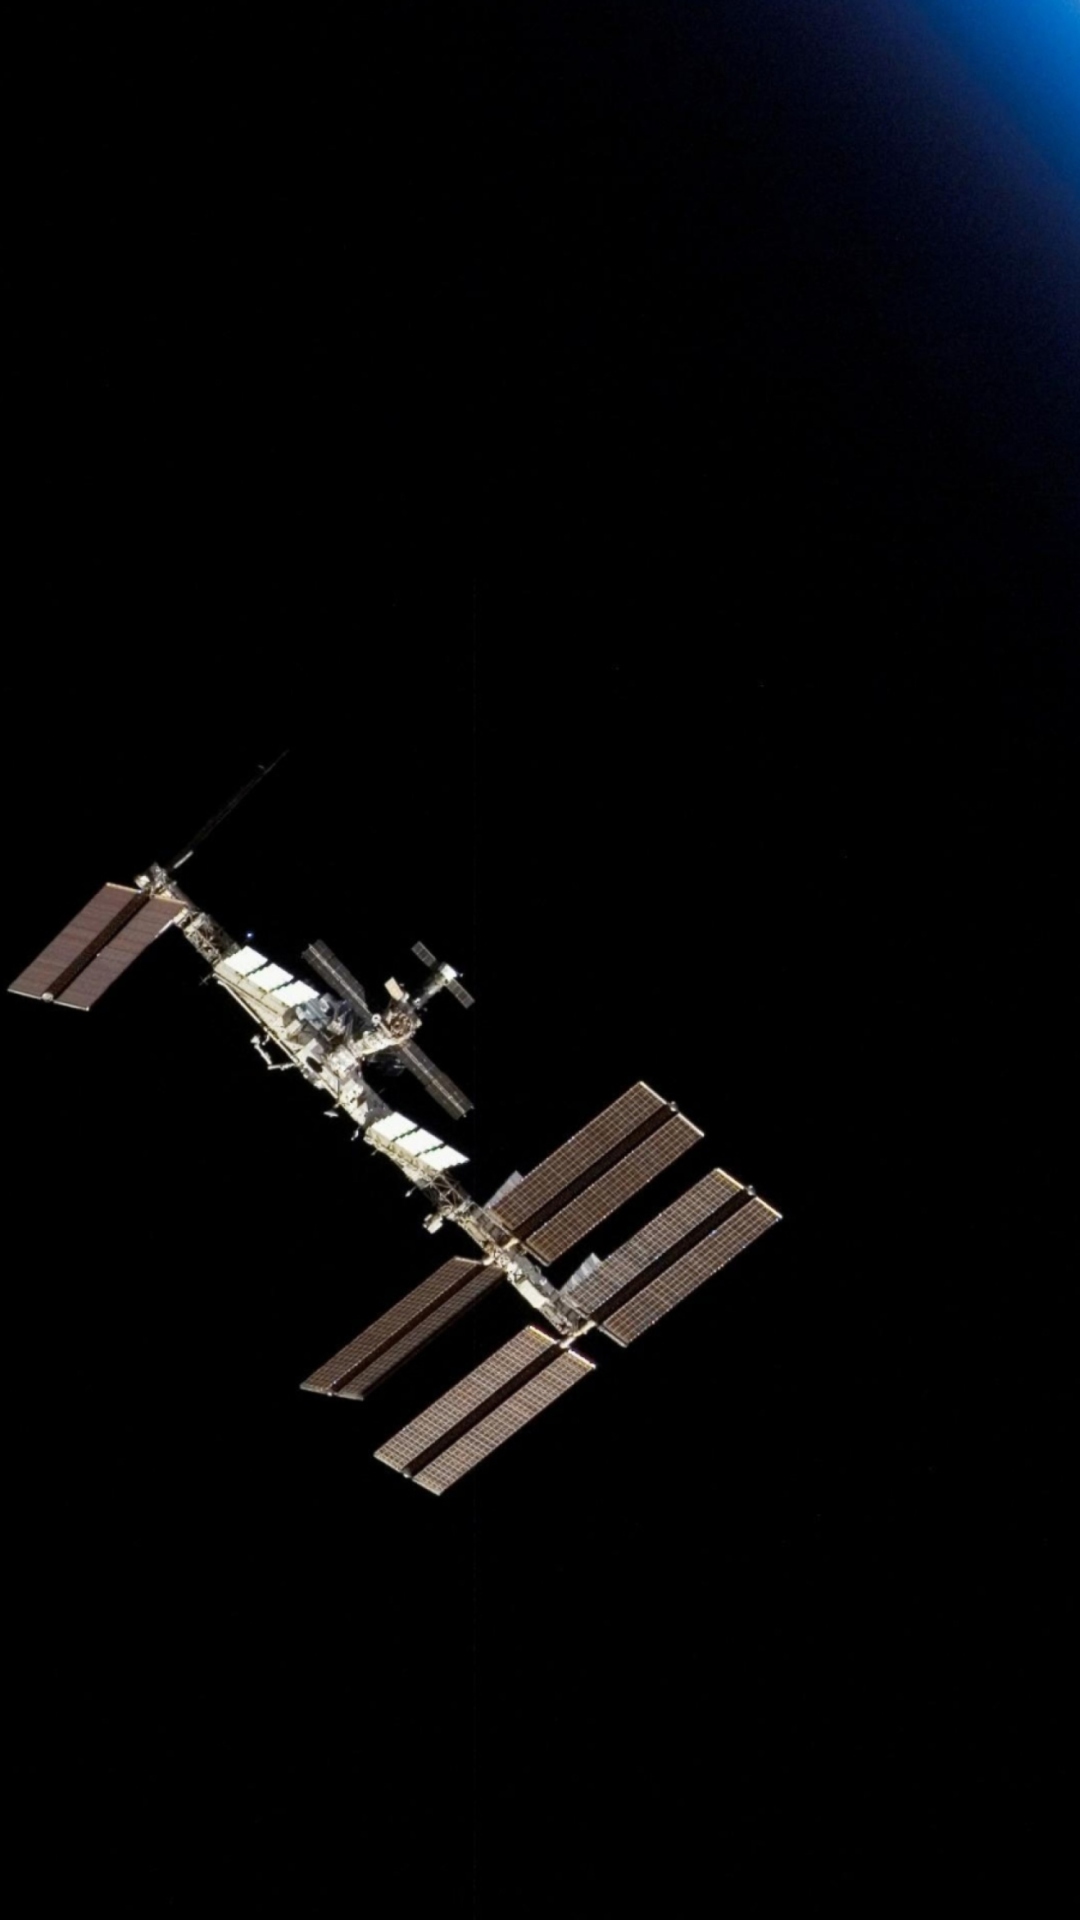 The ISS In Space screenshot #1 1080x1920